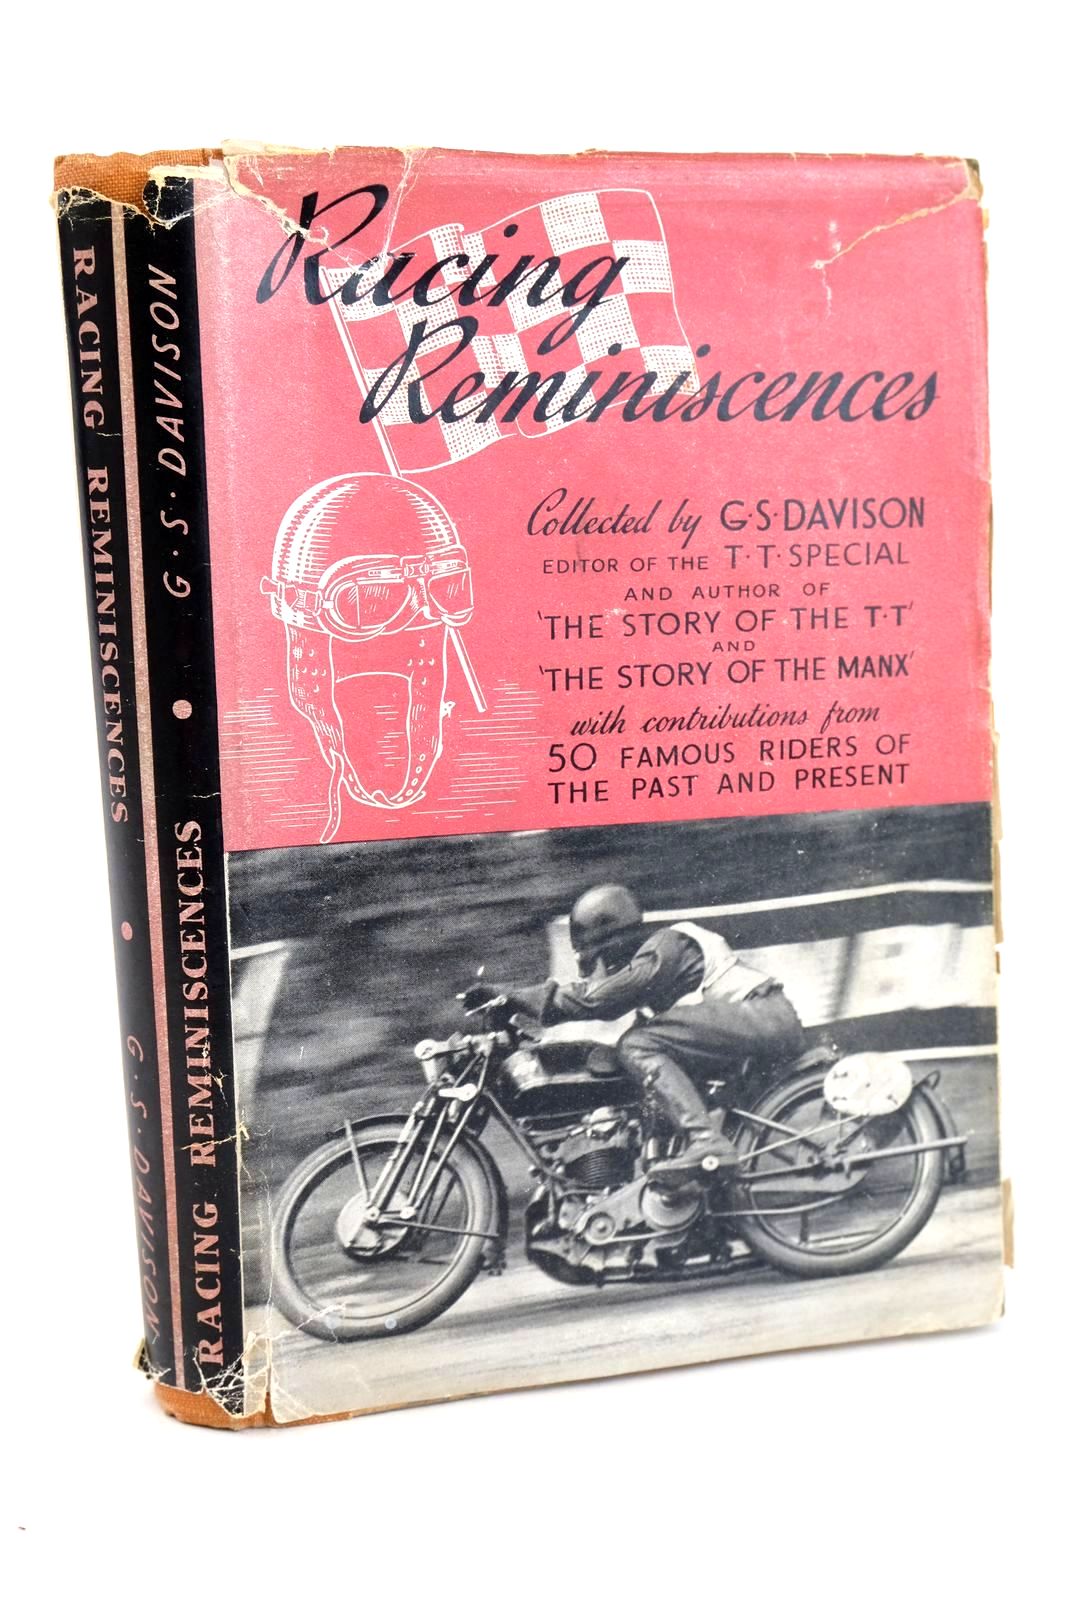 Photo of RACING REMINISCENCES written by Davison, G.S. published by The T.T. Special (STOCK CODE: 1327930)  for sale by Stella & Rose's Books